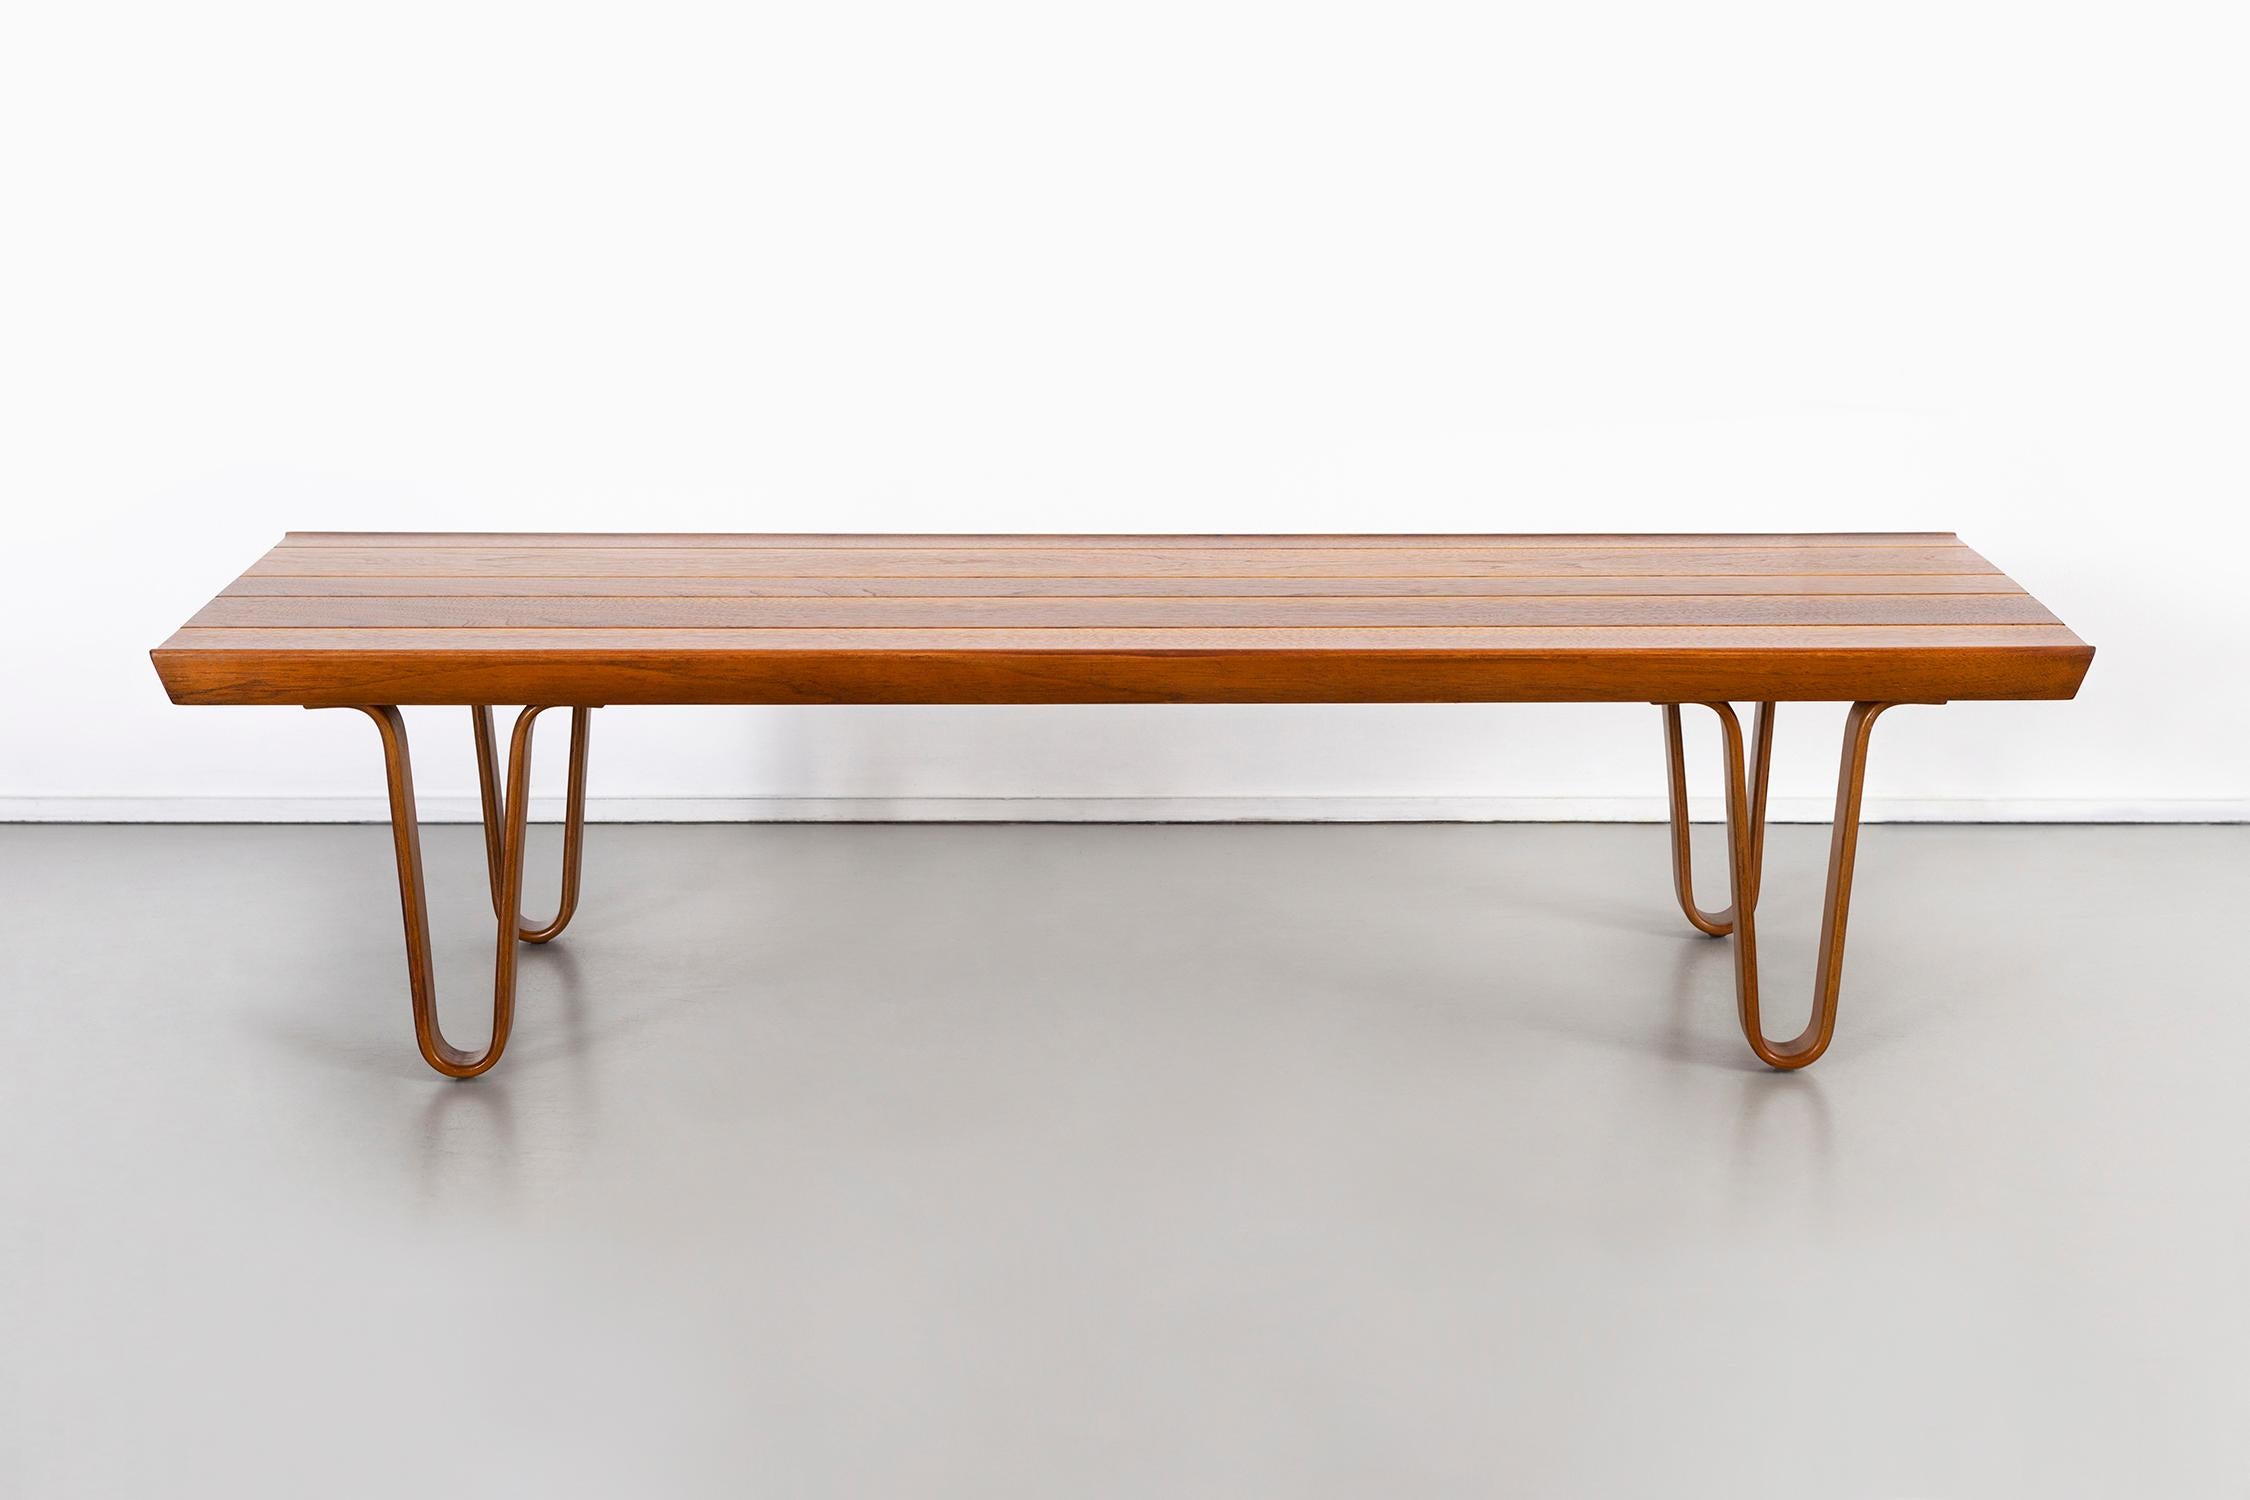 Rare 4 ft version of Long John bench 

Can be used as bench or coffee table

Designed by Edward Wormley for Dunbar

USA, circa 1950s.

Walnut freshly restored 

Measures: 11 ½” H x 48” W x 19 1/8” D.